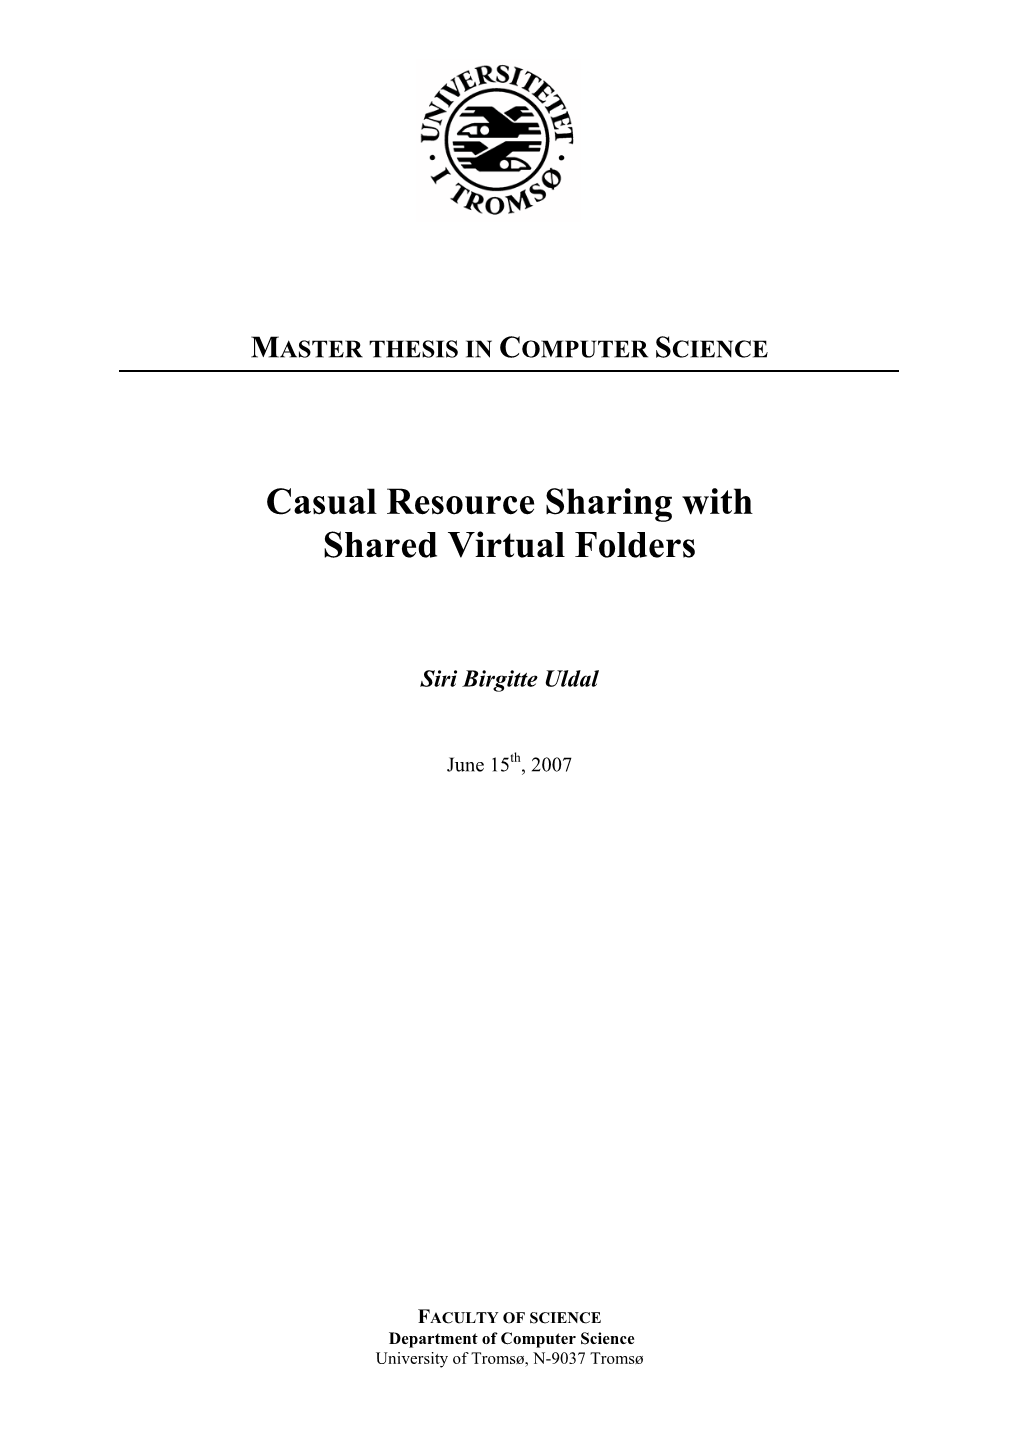 Casual Resource Sharing with Shared Virtual Folders